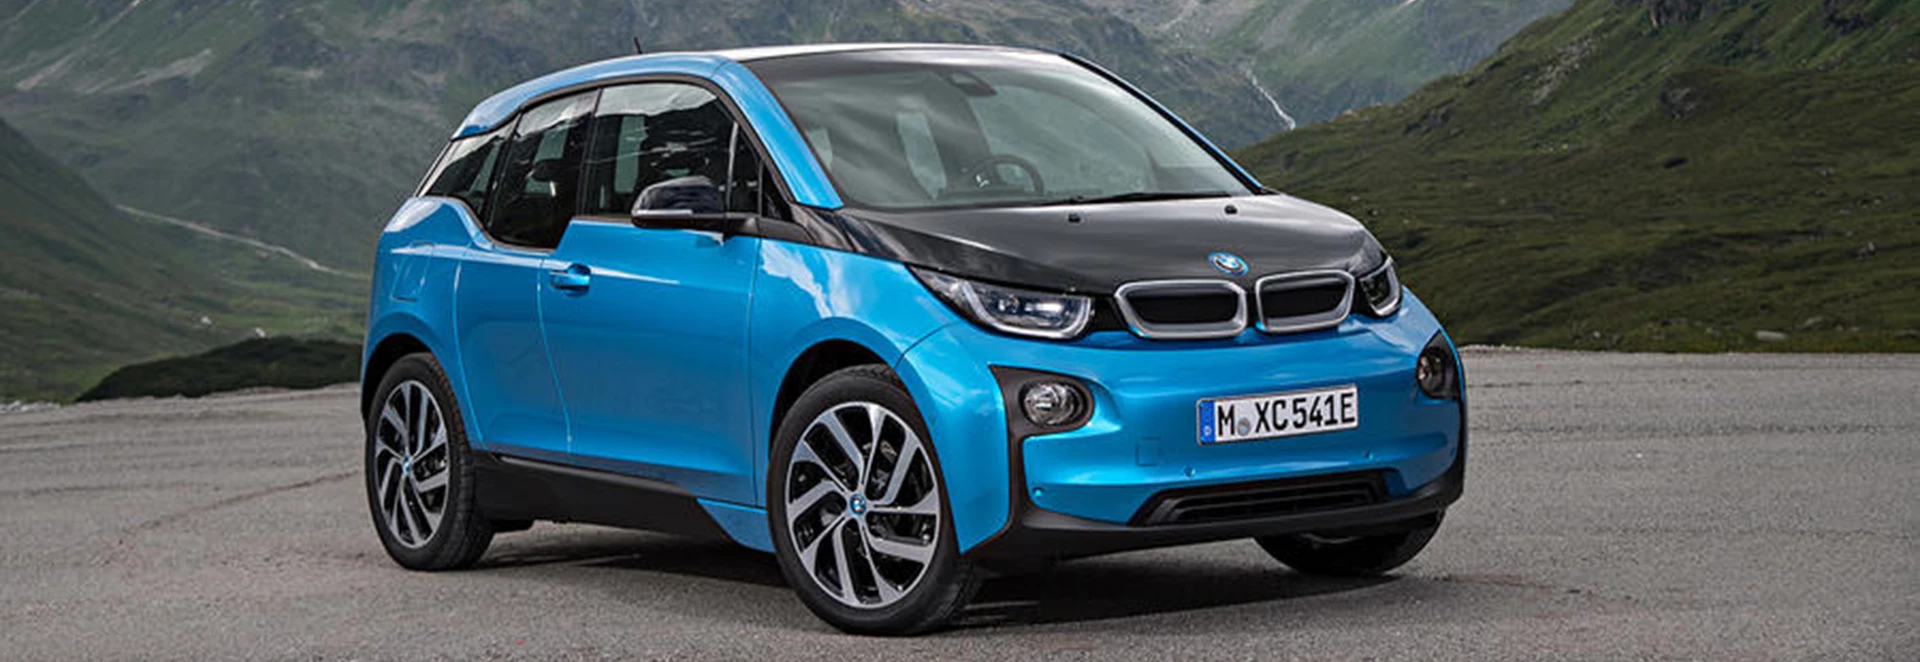 BMW i3 batteries can power your home 